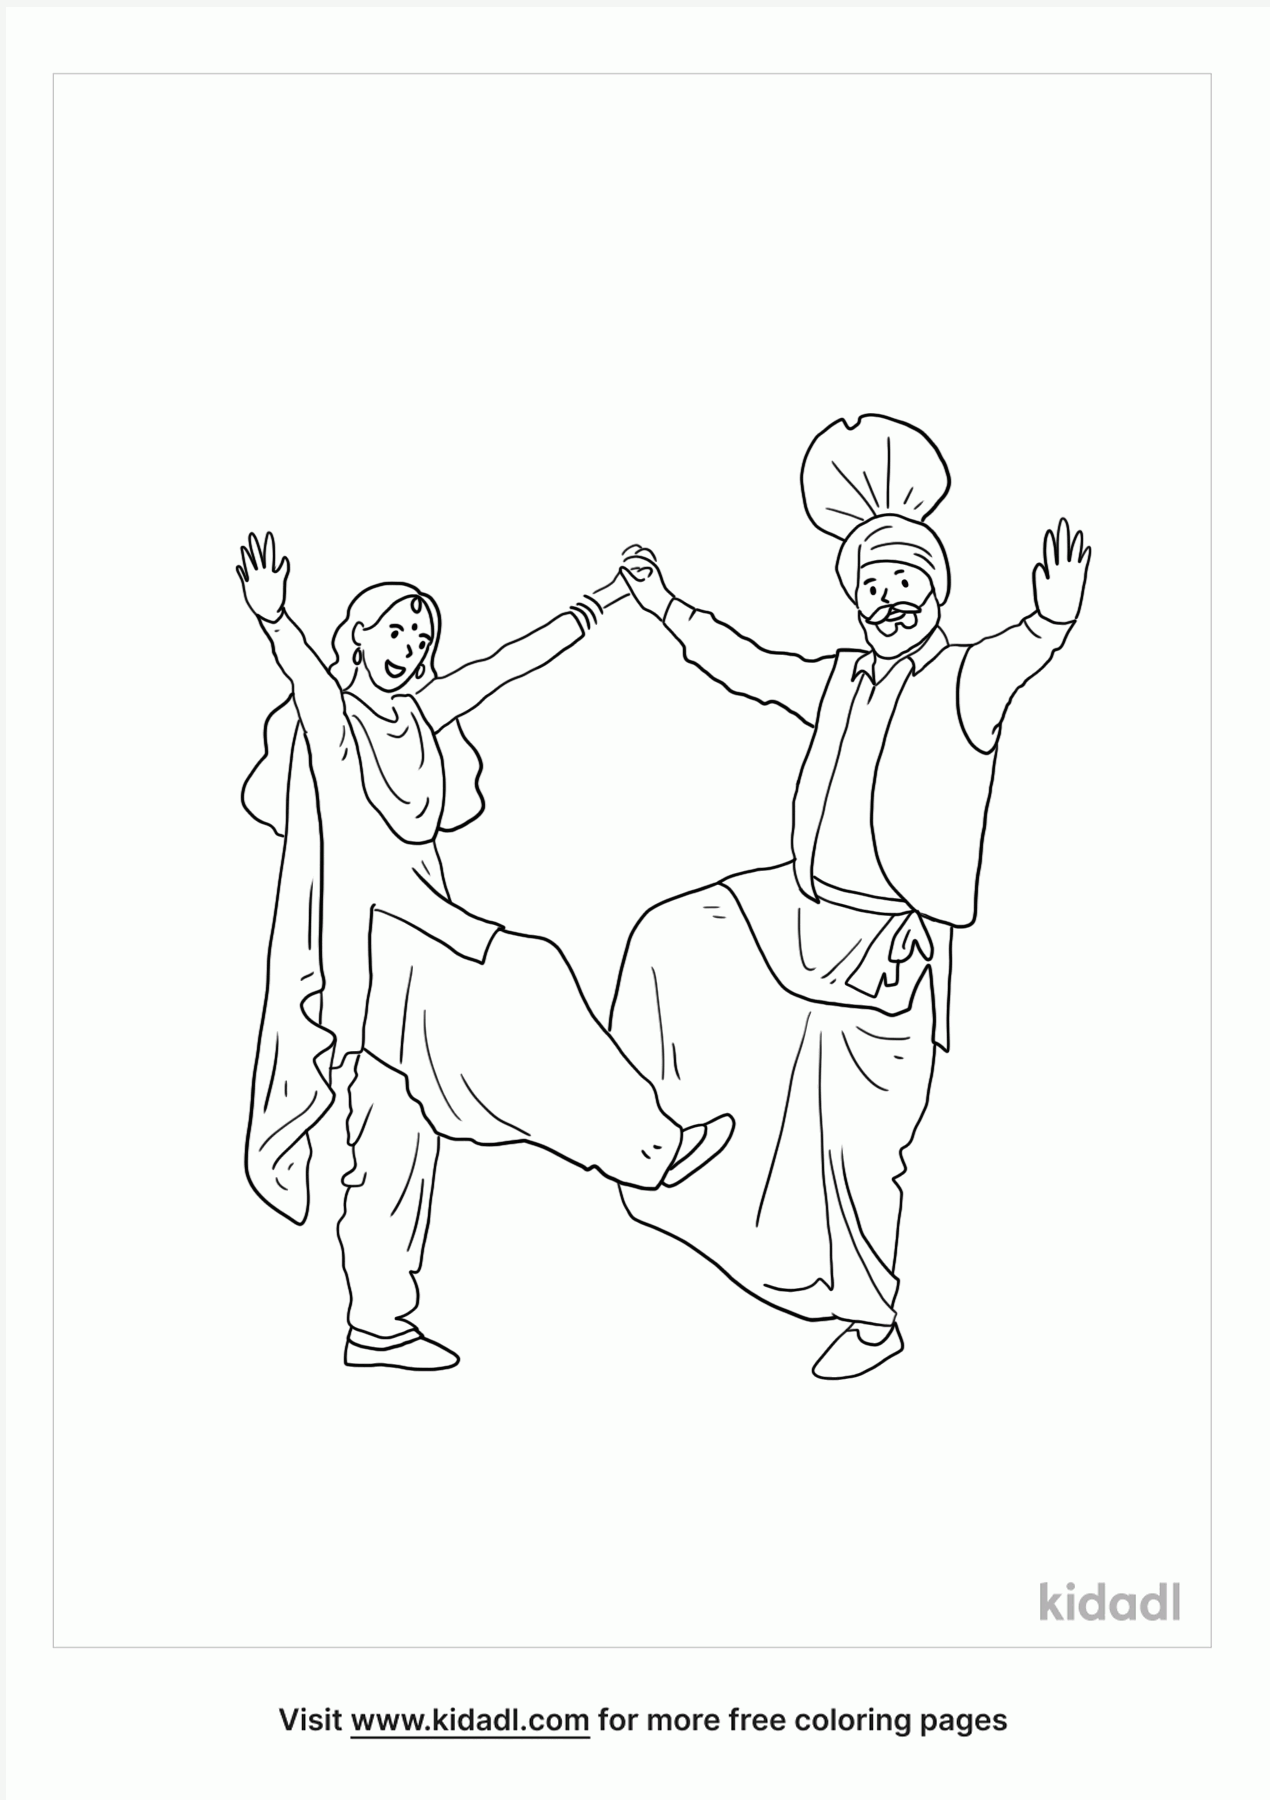 Folk Culture Coloring Pages | Free People Coloring Pages | Kidadl